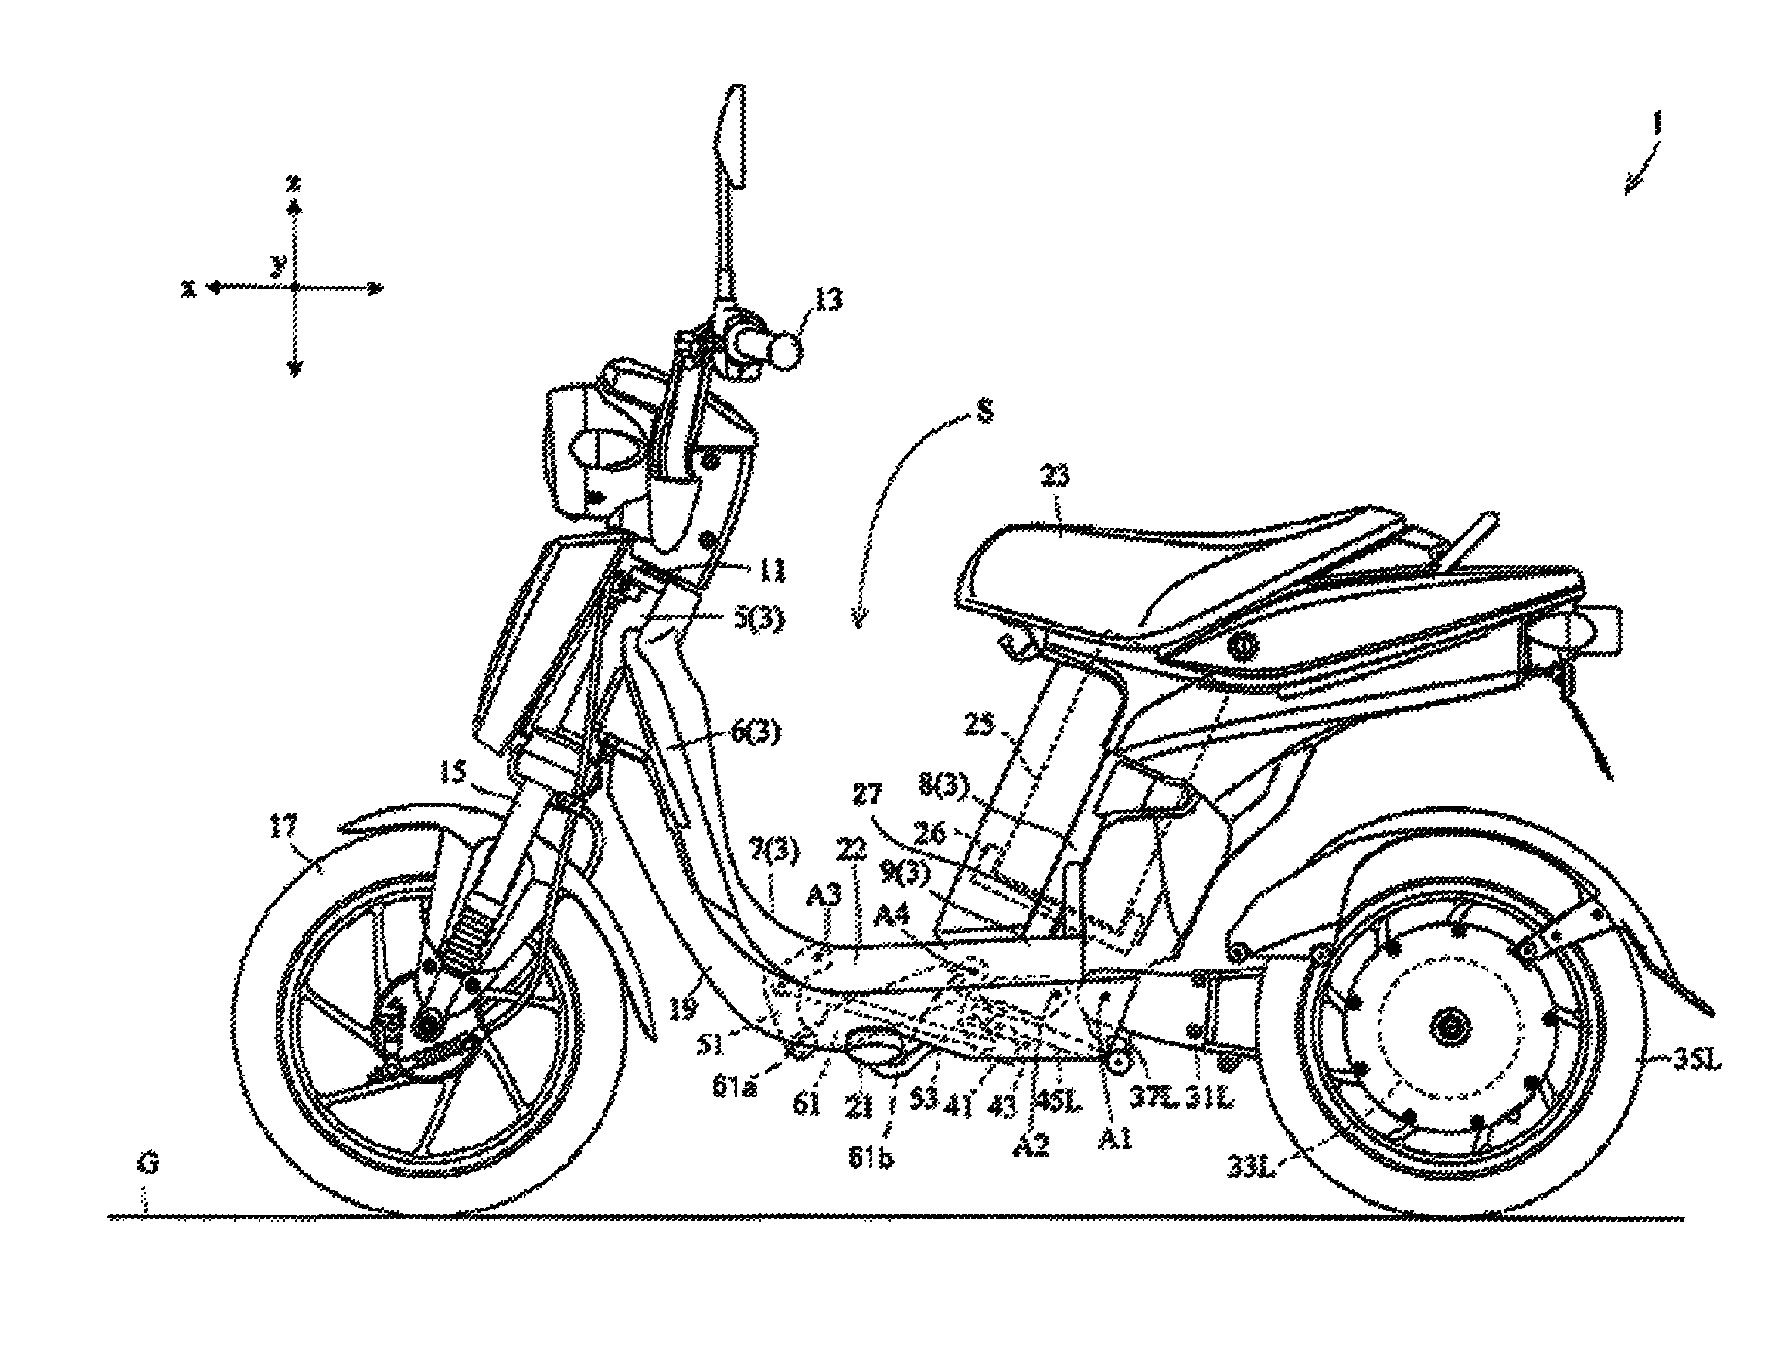 Two-rear-wheel electric vehicle